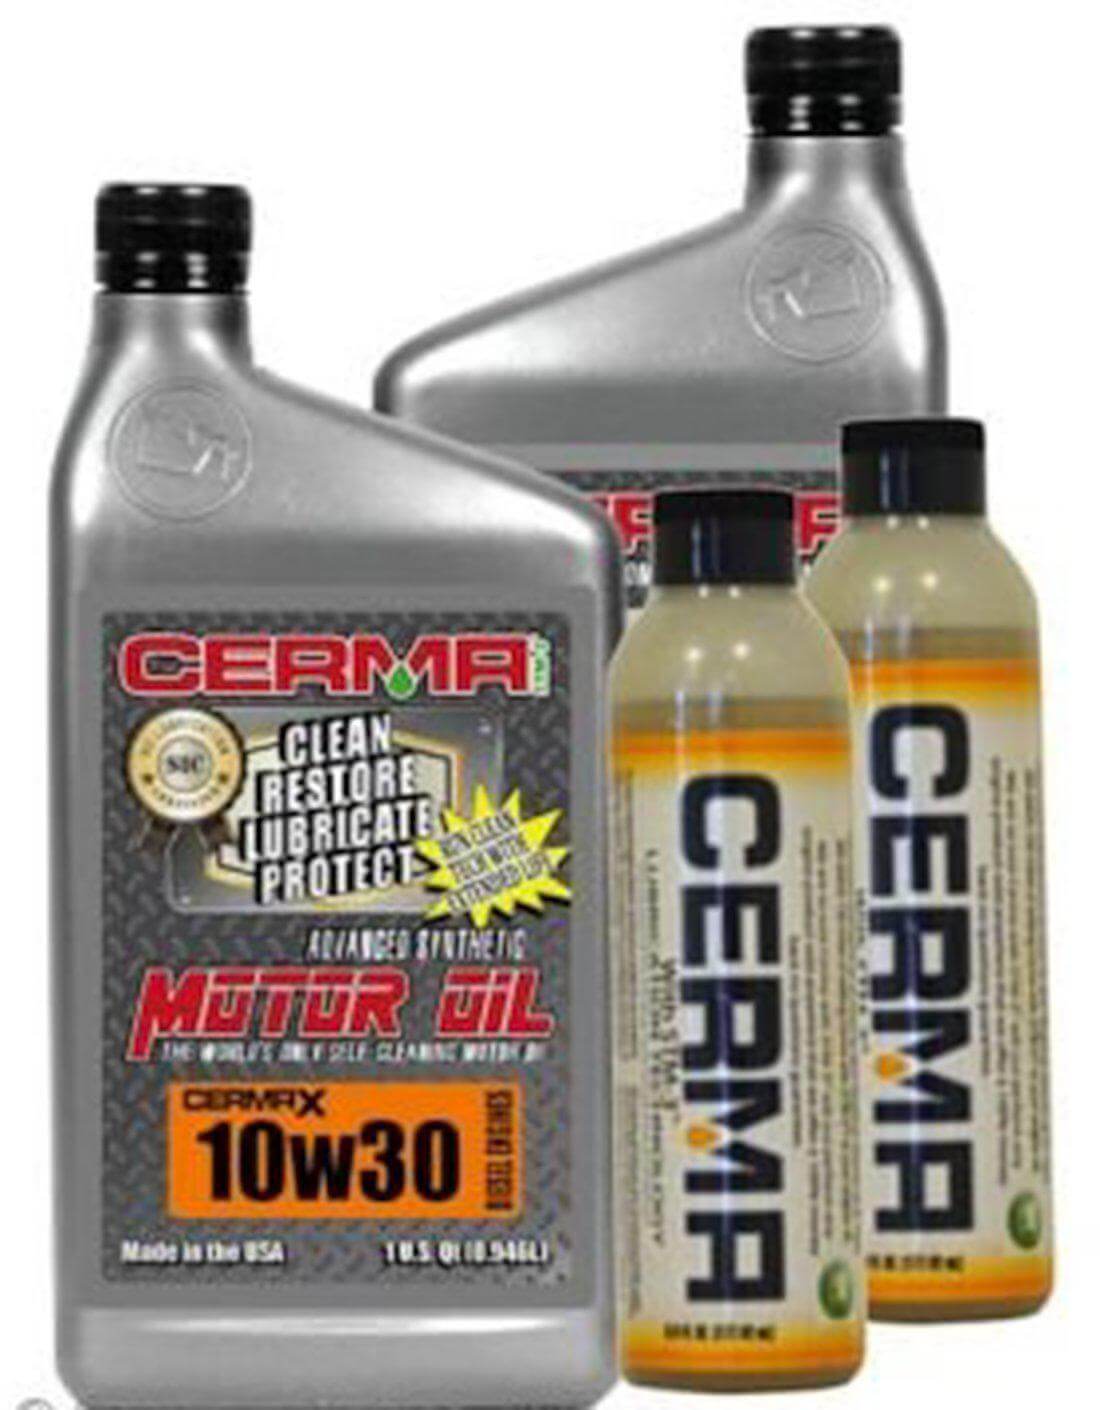 Cermax Diesel Ceramic Synthetic Oil Value Package for Semi Truck Engines at $805.41 only from cermatreatment.com